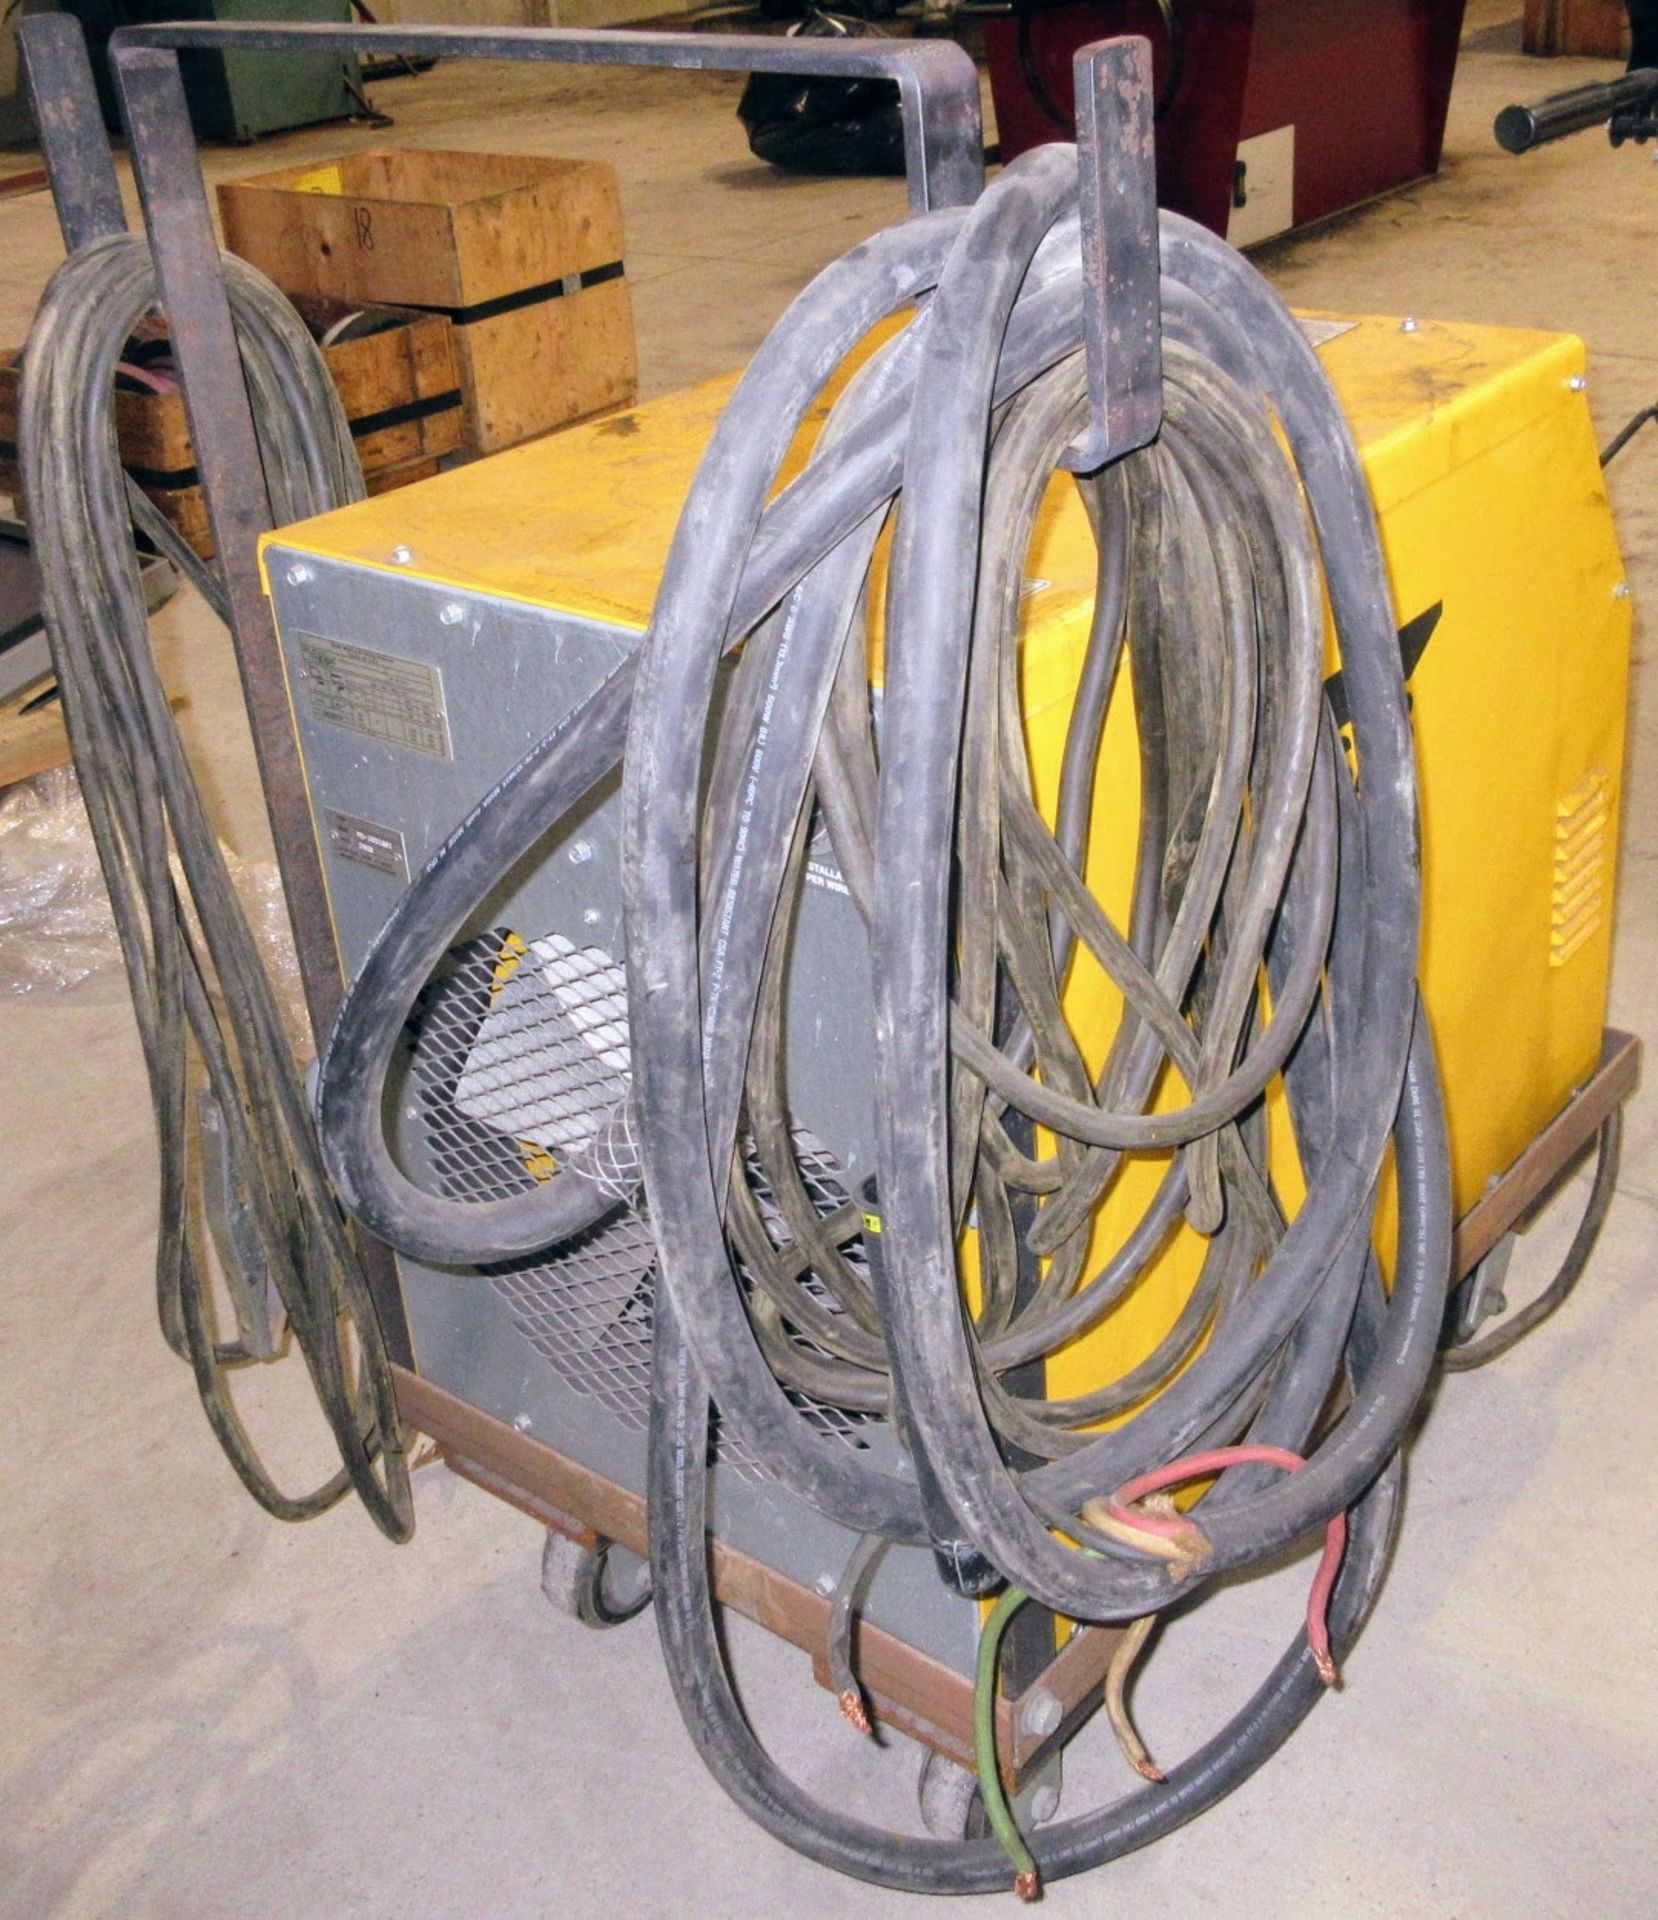 ESAB 653CVCC MIG WELDER W/ CABLES AND CART - Image 4 of 4